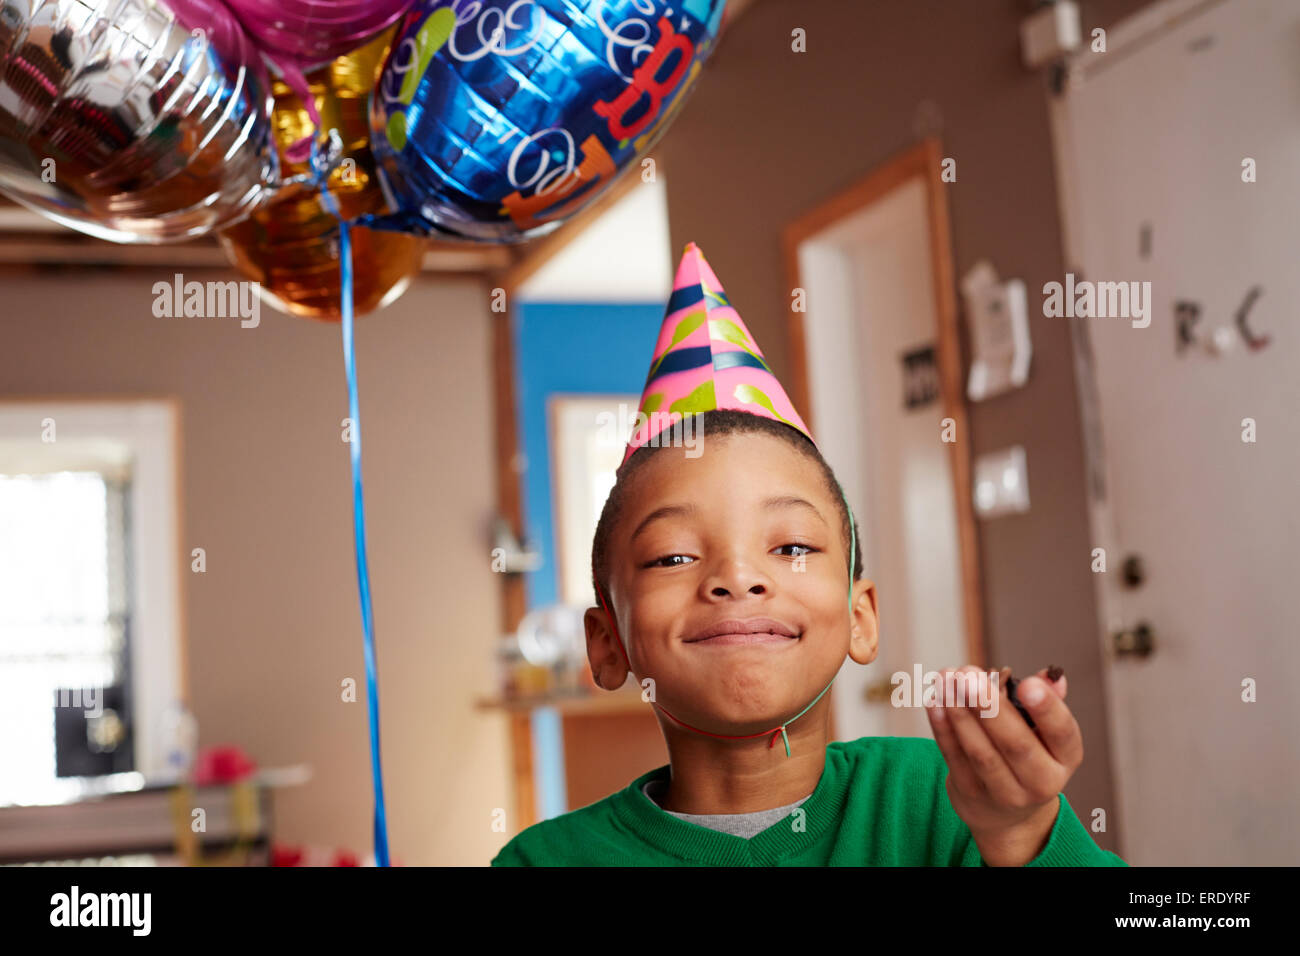 Black Boy wearing party hat holding balloons Banque D'Images